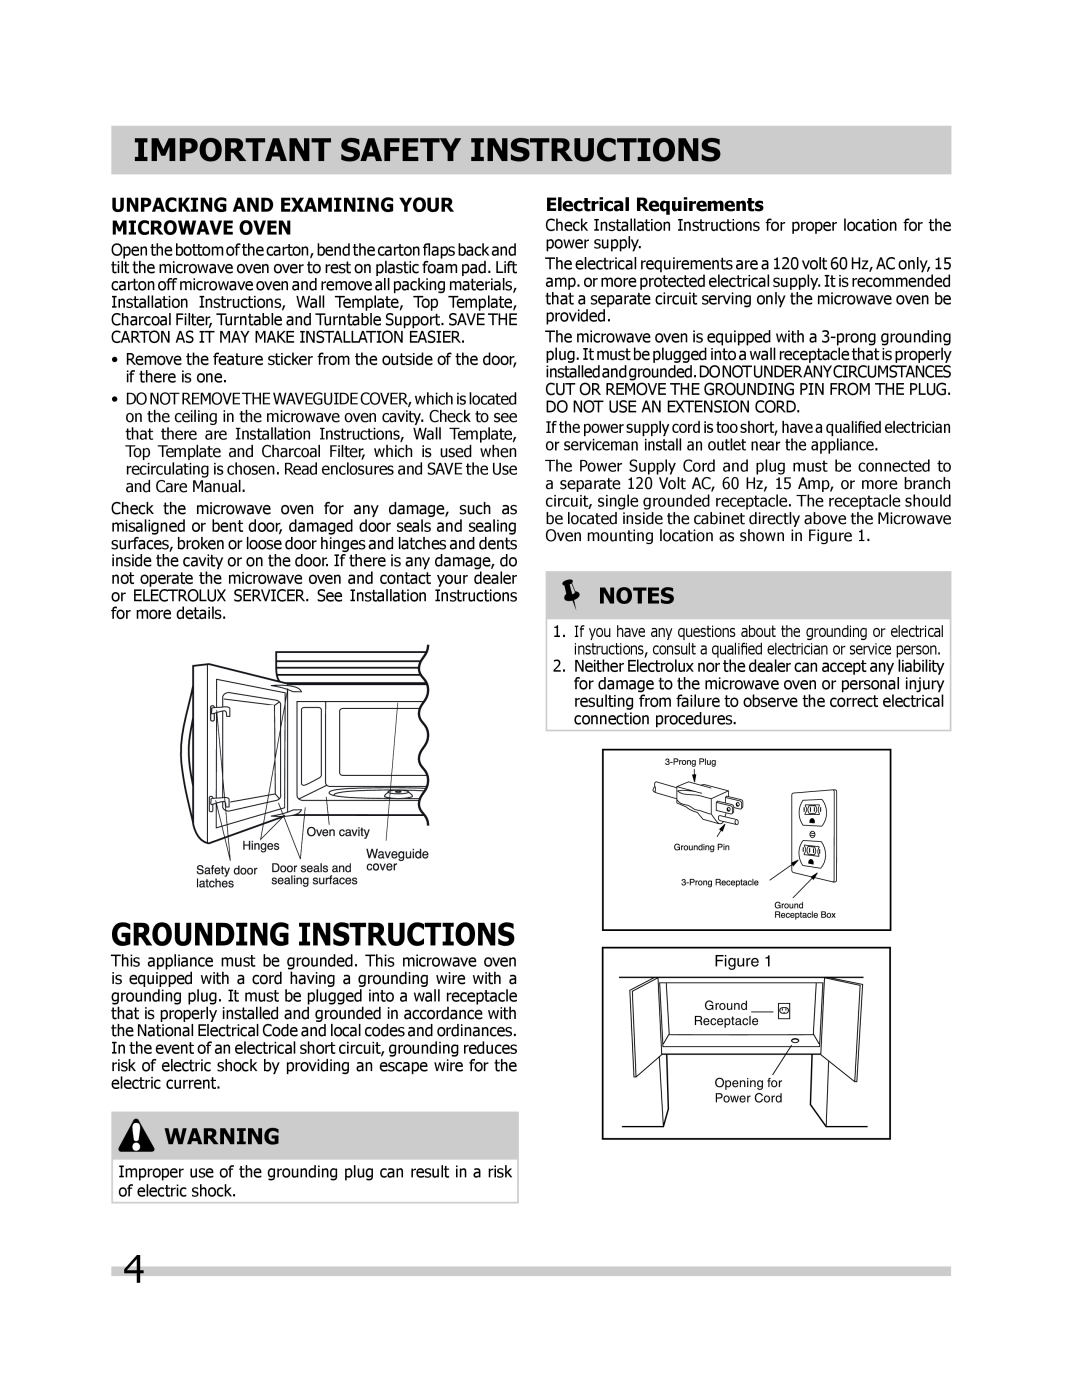 Frigidaire FPBM189KF Unpacking And Examining Your Microwave Oven, Electrical Requirements, Important Safety Instructions 